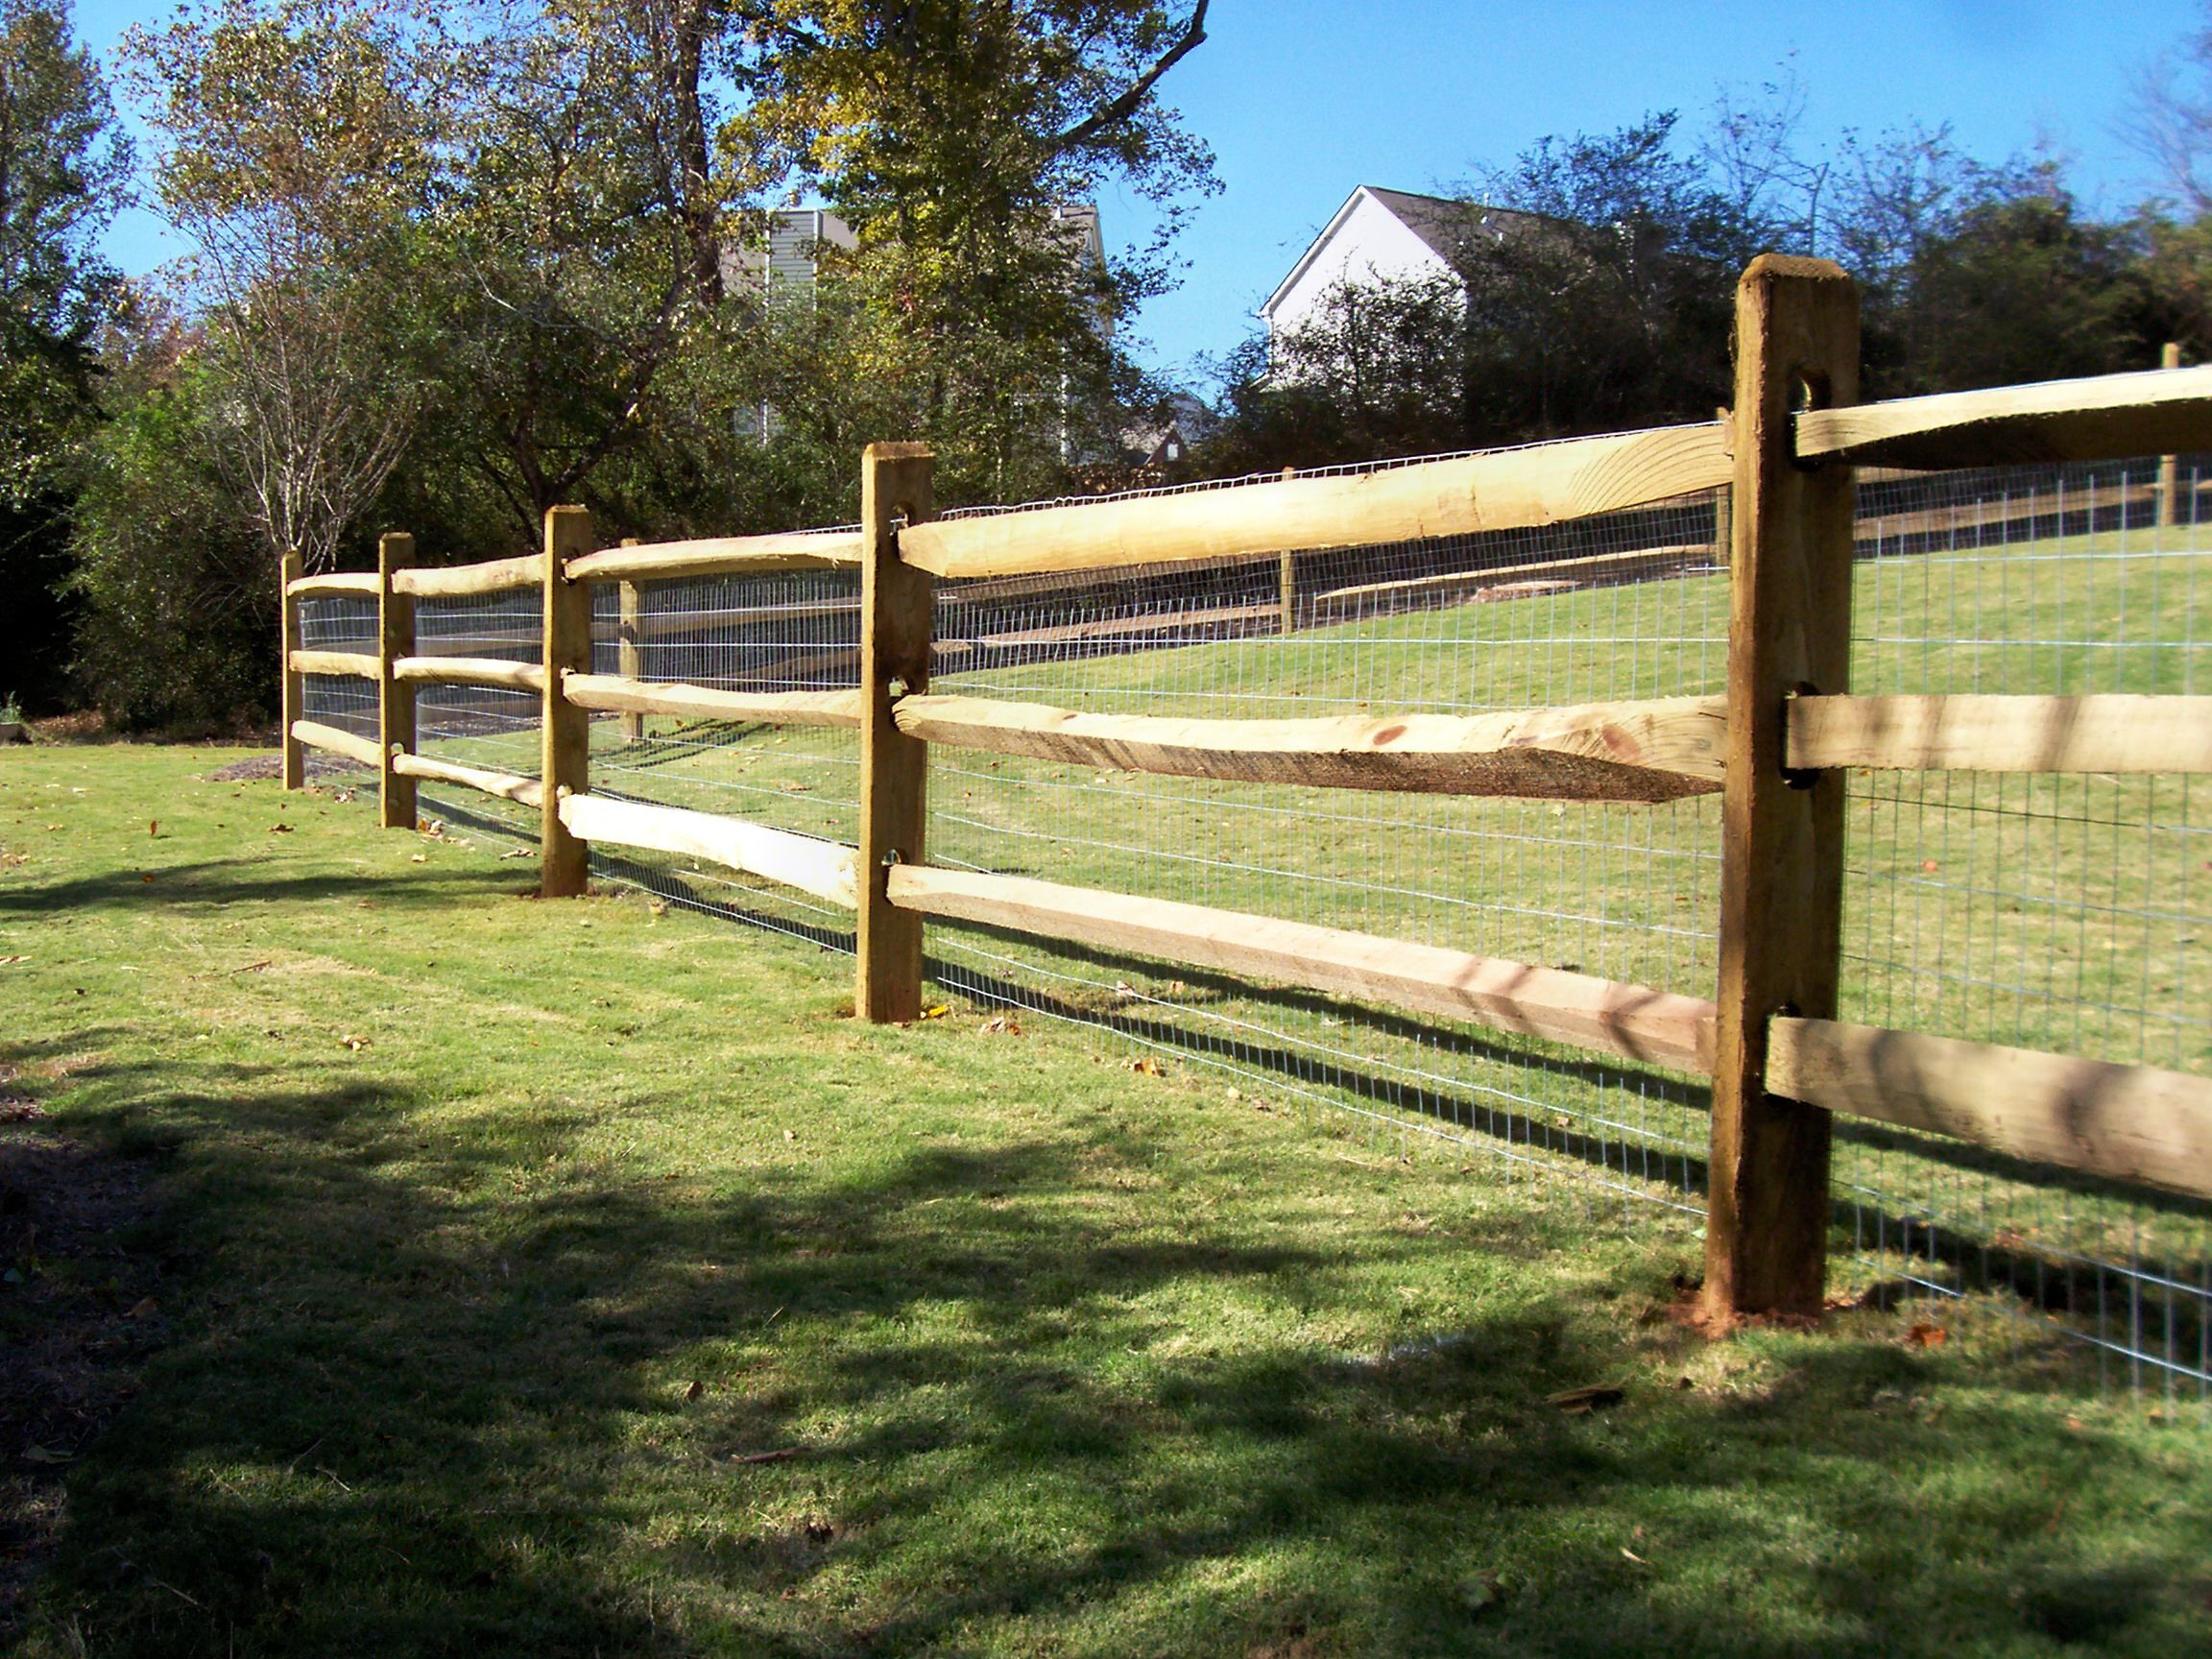 Ranch Style Wood Fence Designs Wood Ranch Rail Fence Fencing Ideas regarding proportions 2304 X 1728